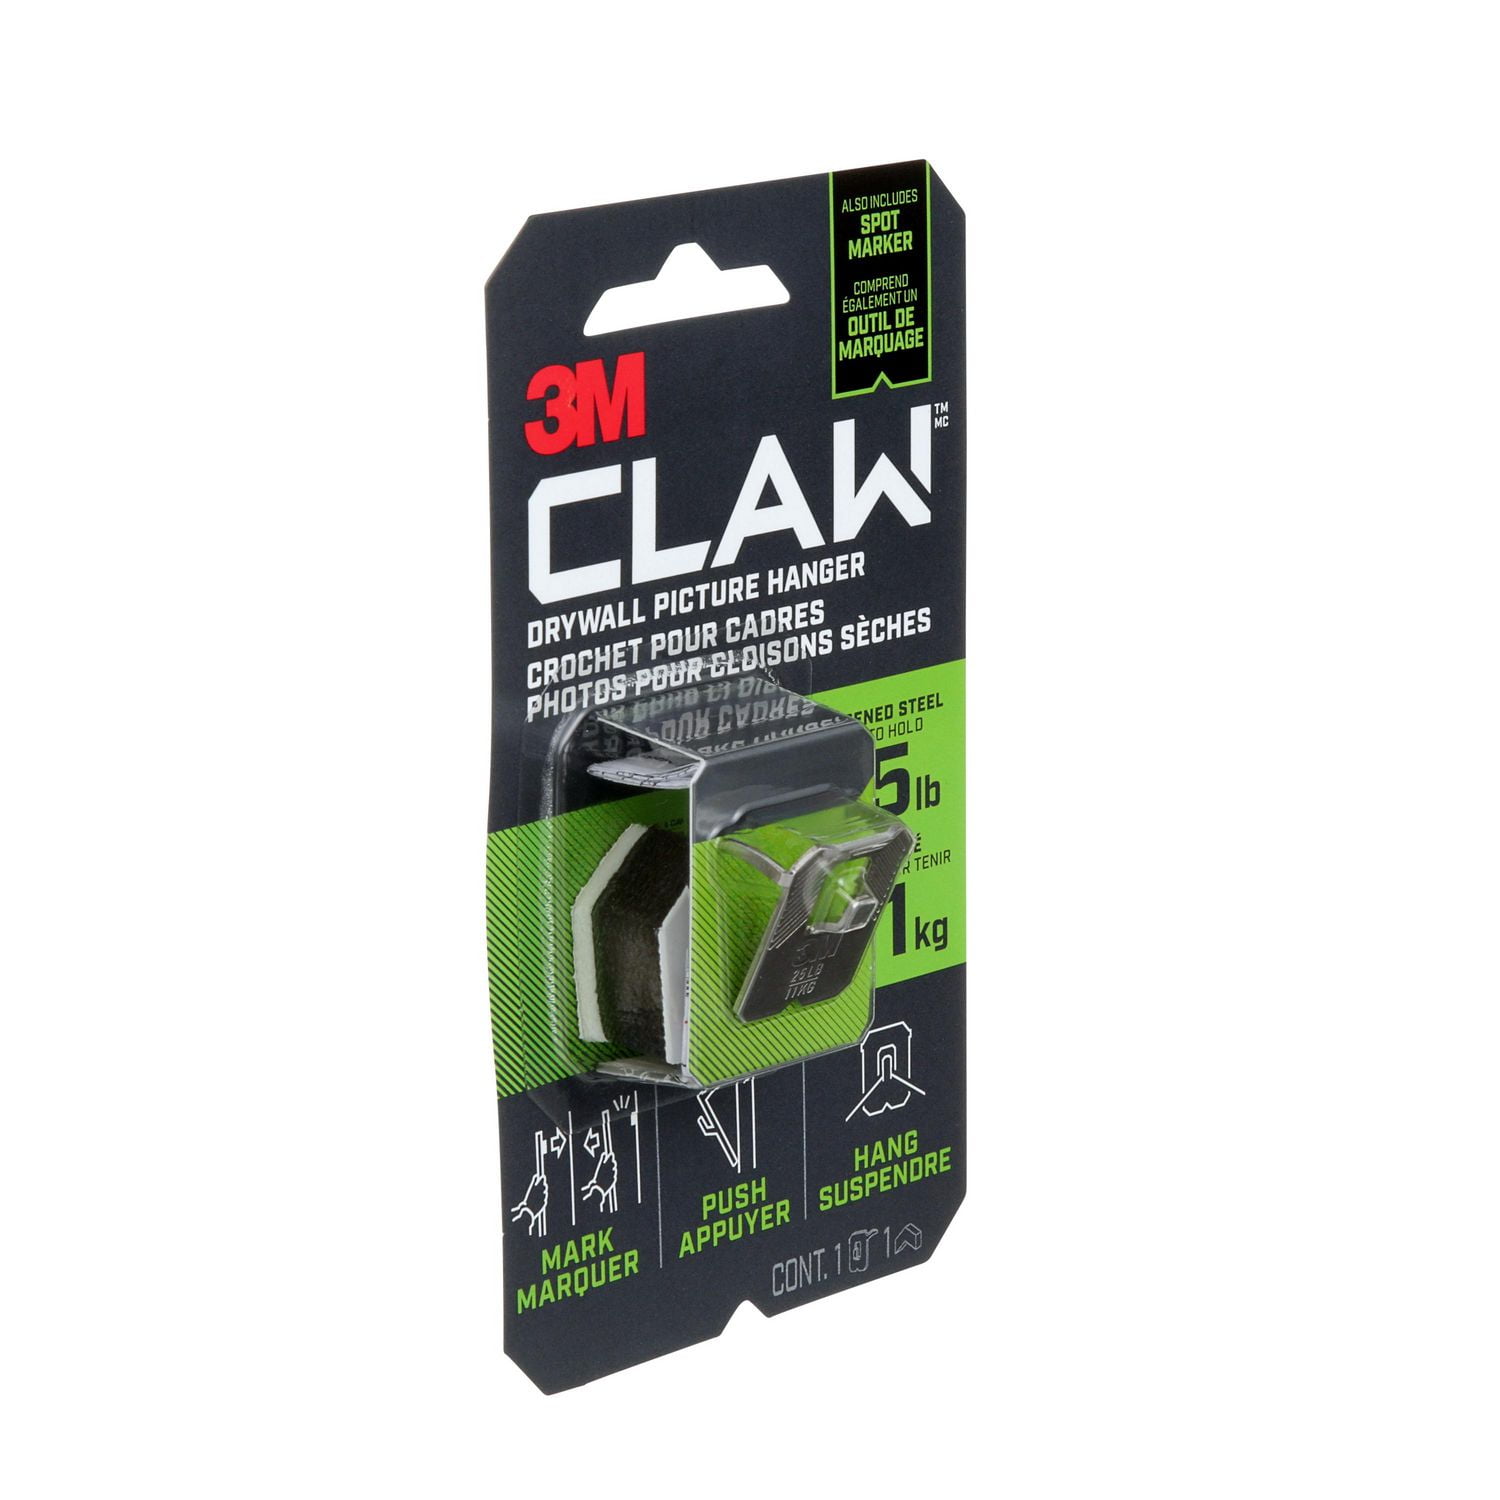 CLAW Drywall Picture Hanger - 25 lb